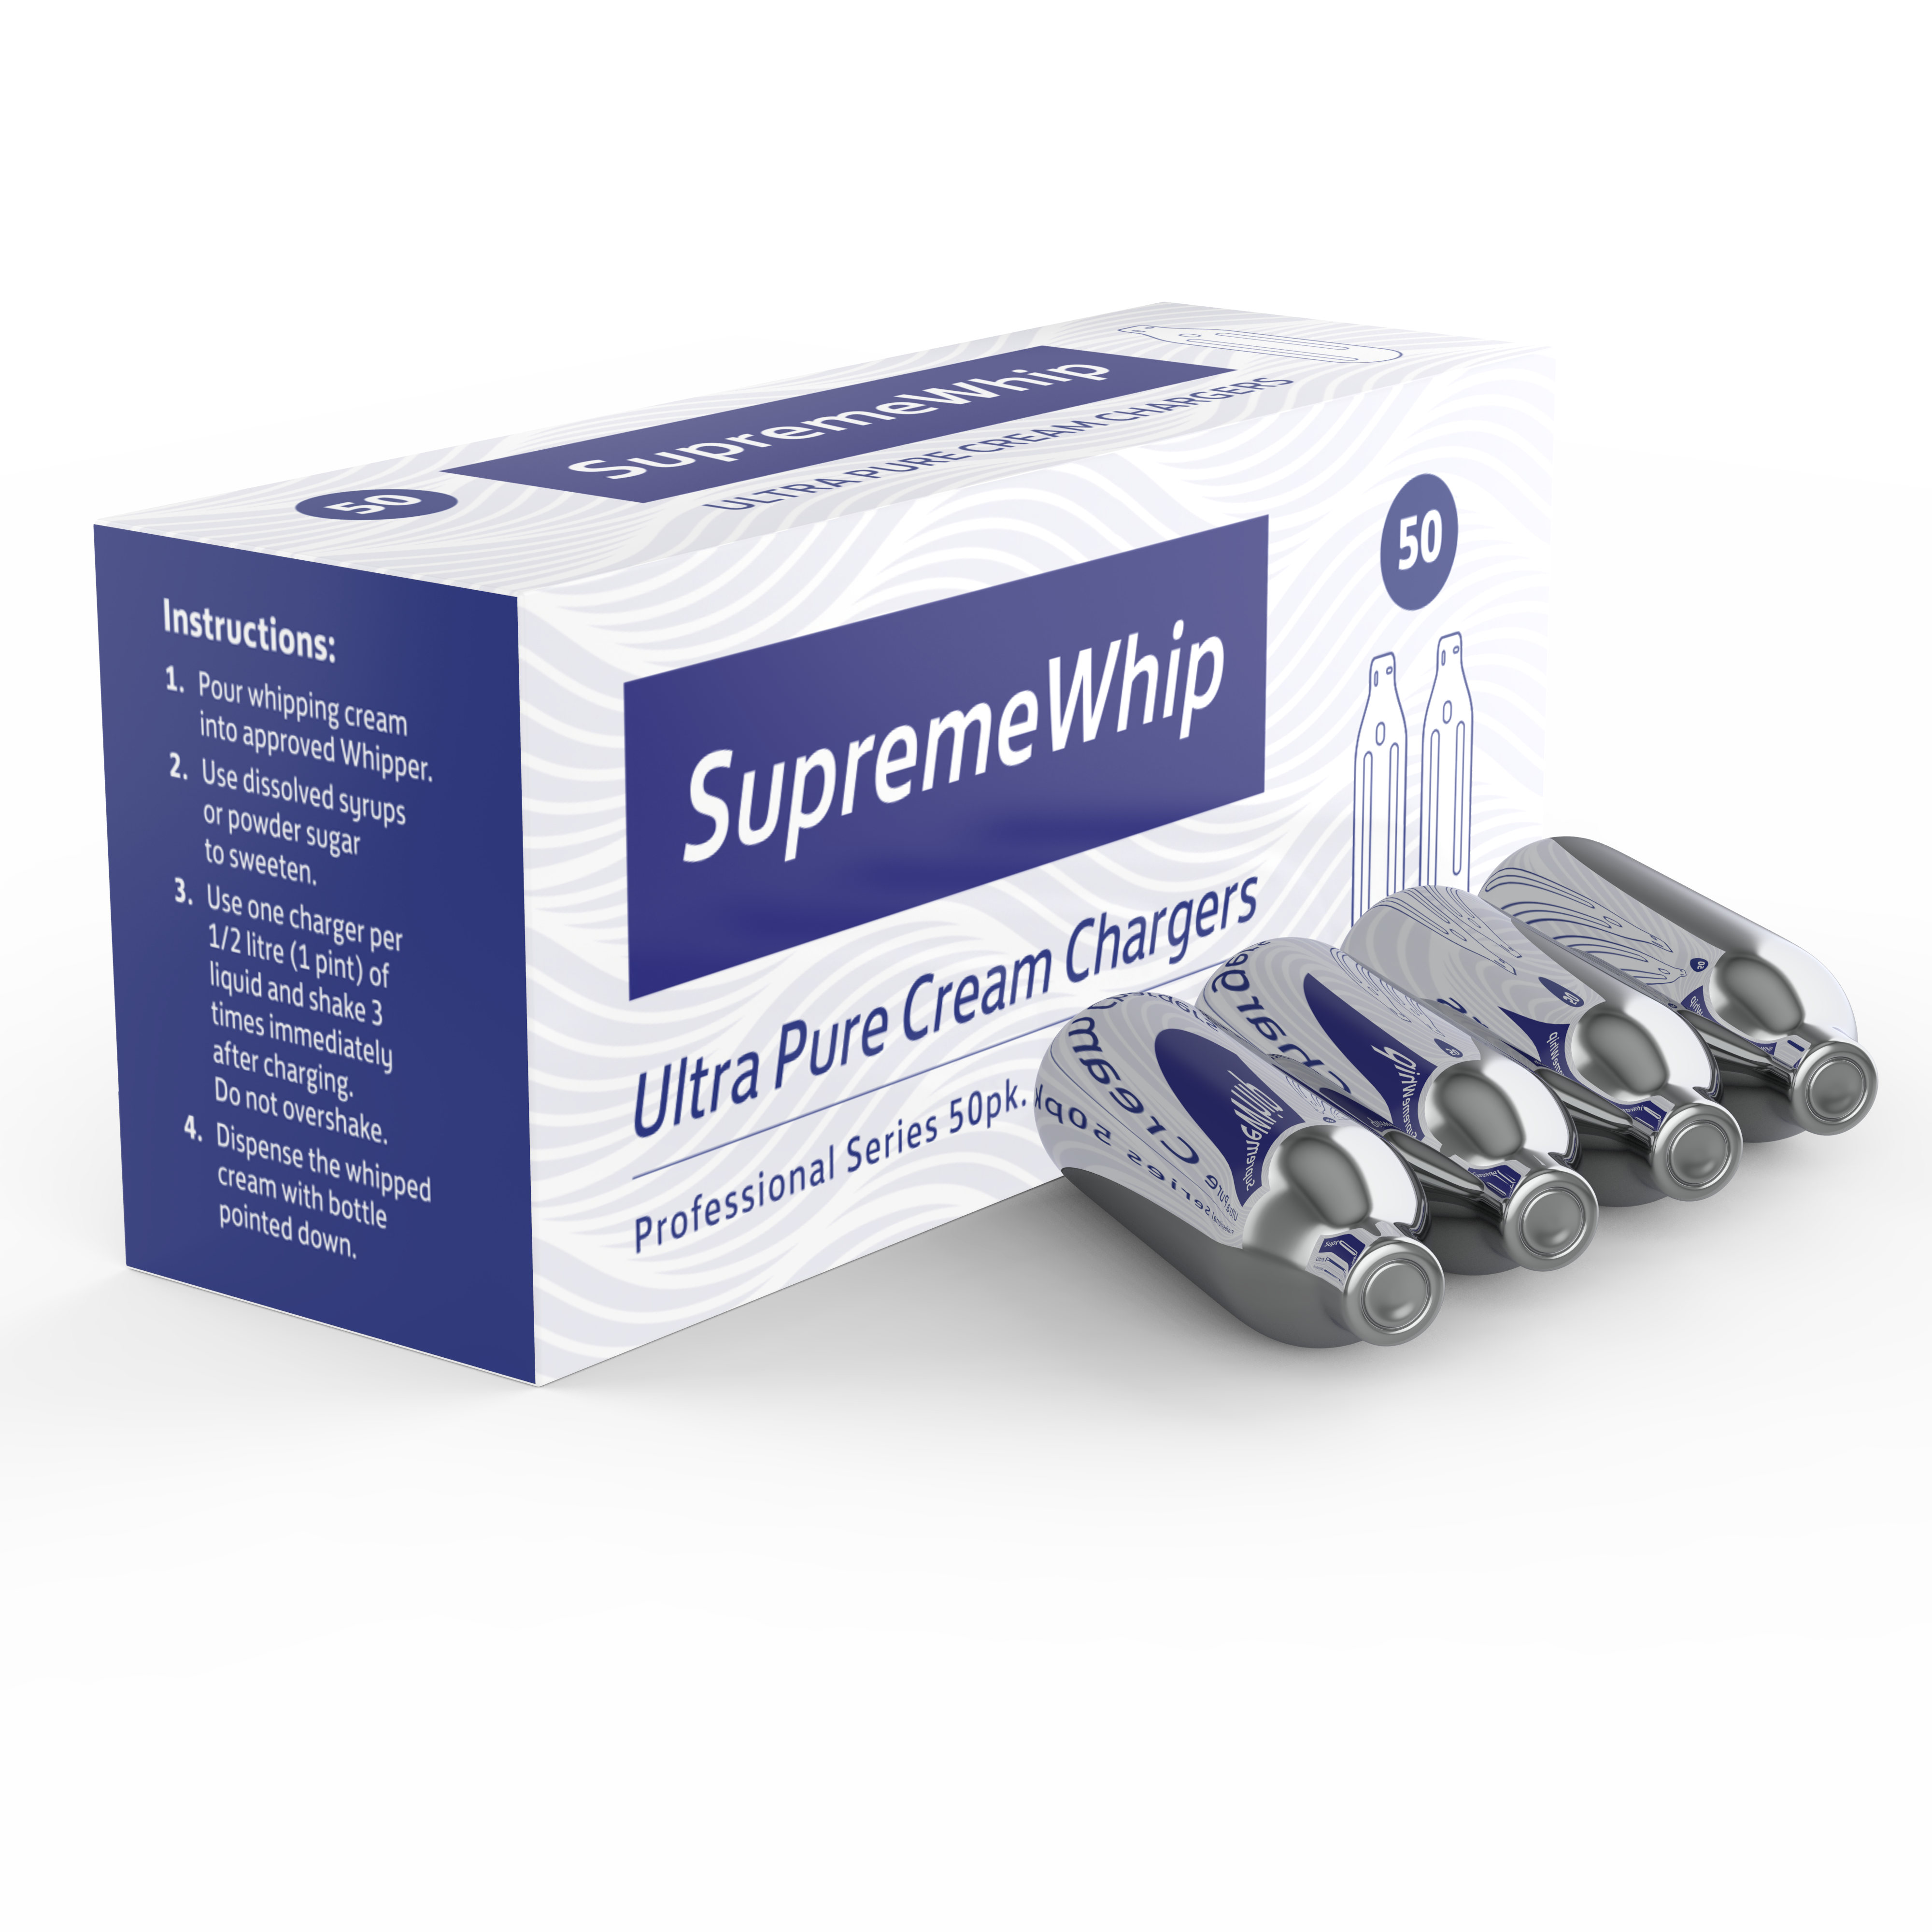 SupremeWhip Cream Chargers 8.2g in 50Pks - WHOLESALE